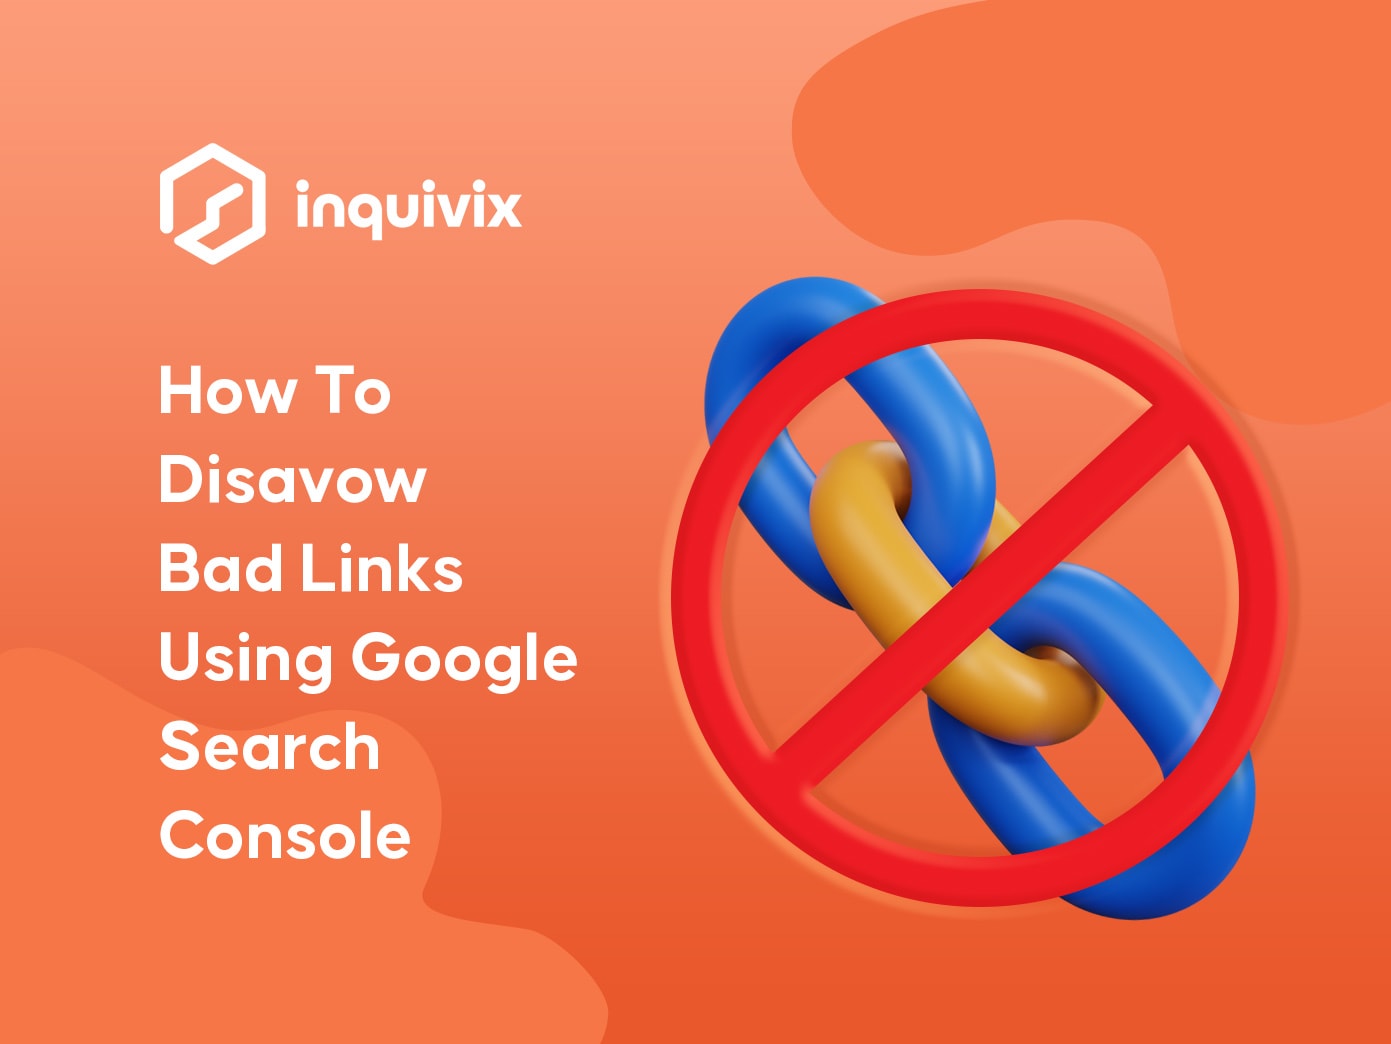 How To Disavow Bad Links Using Google Search Console